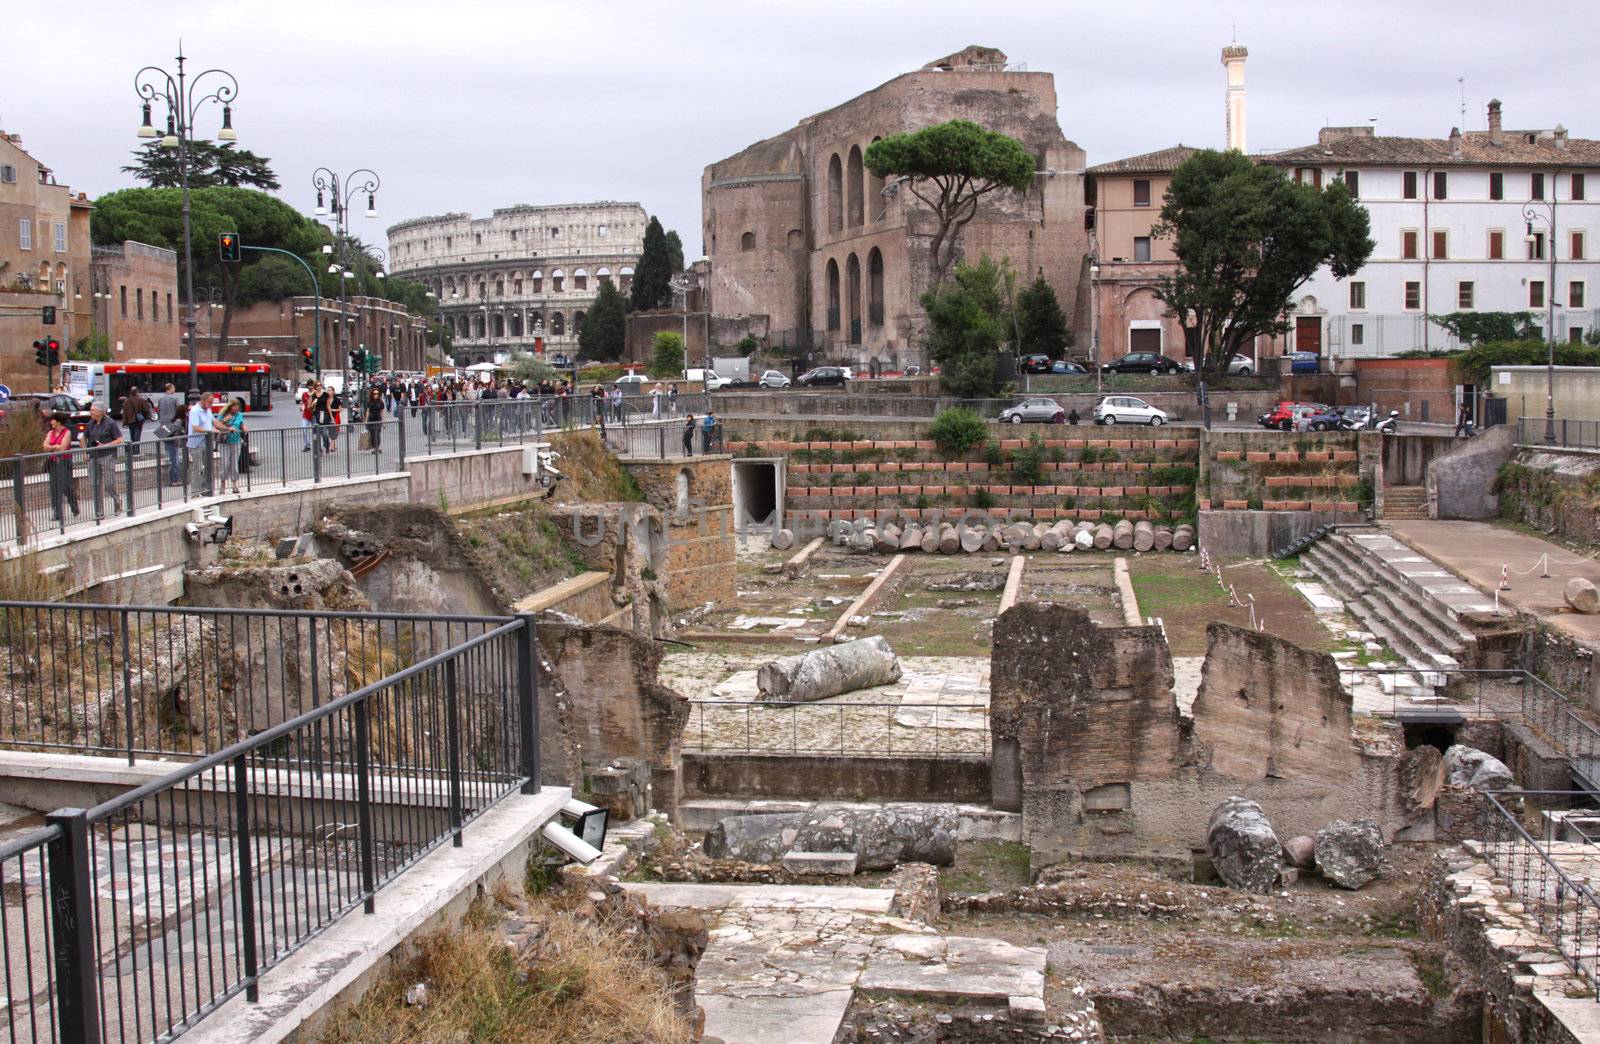 The Forum in Rome with the Colosseum in the background.